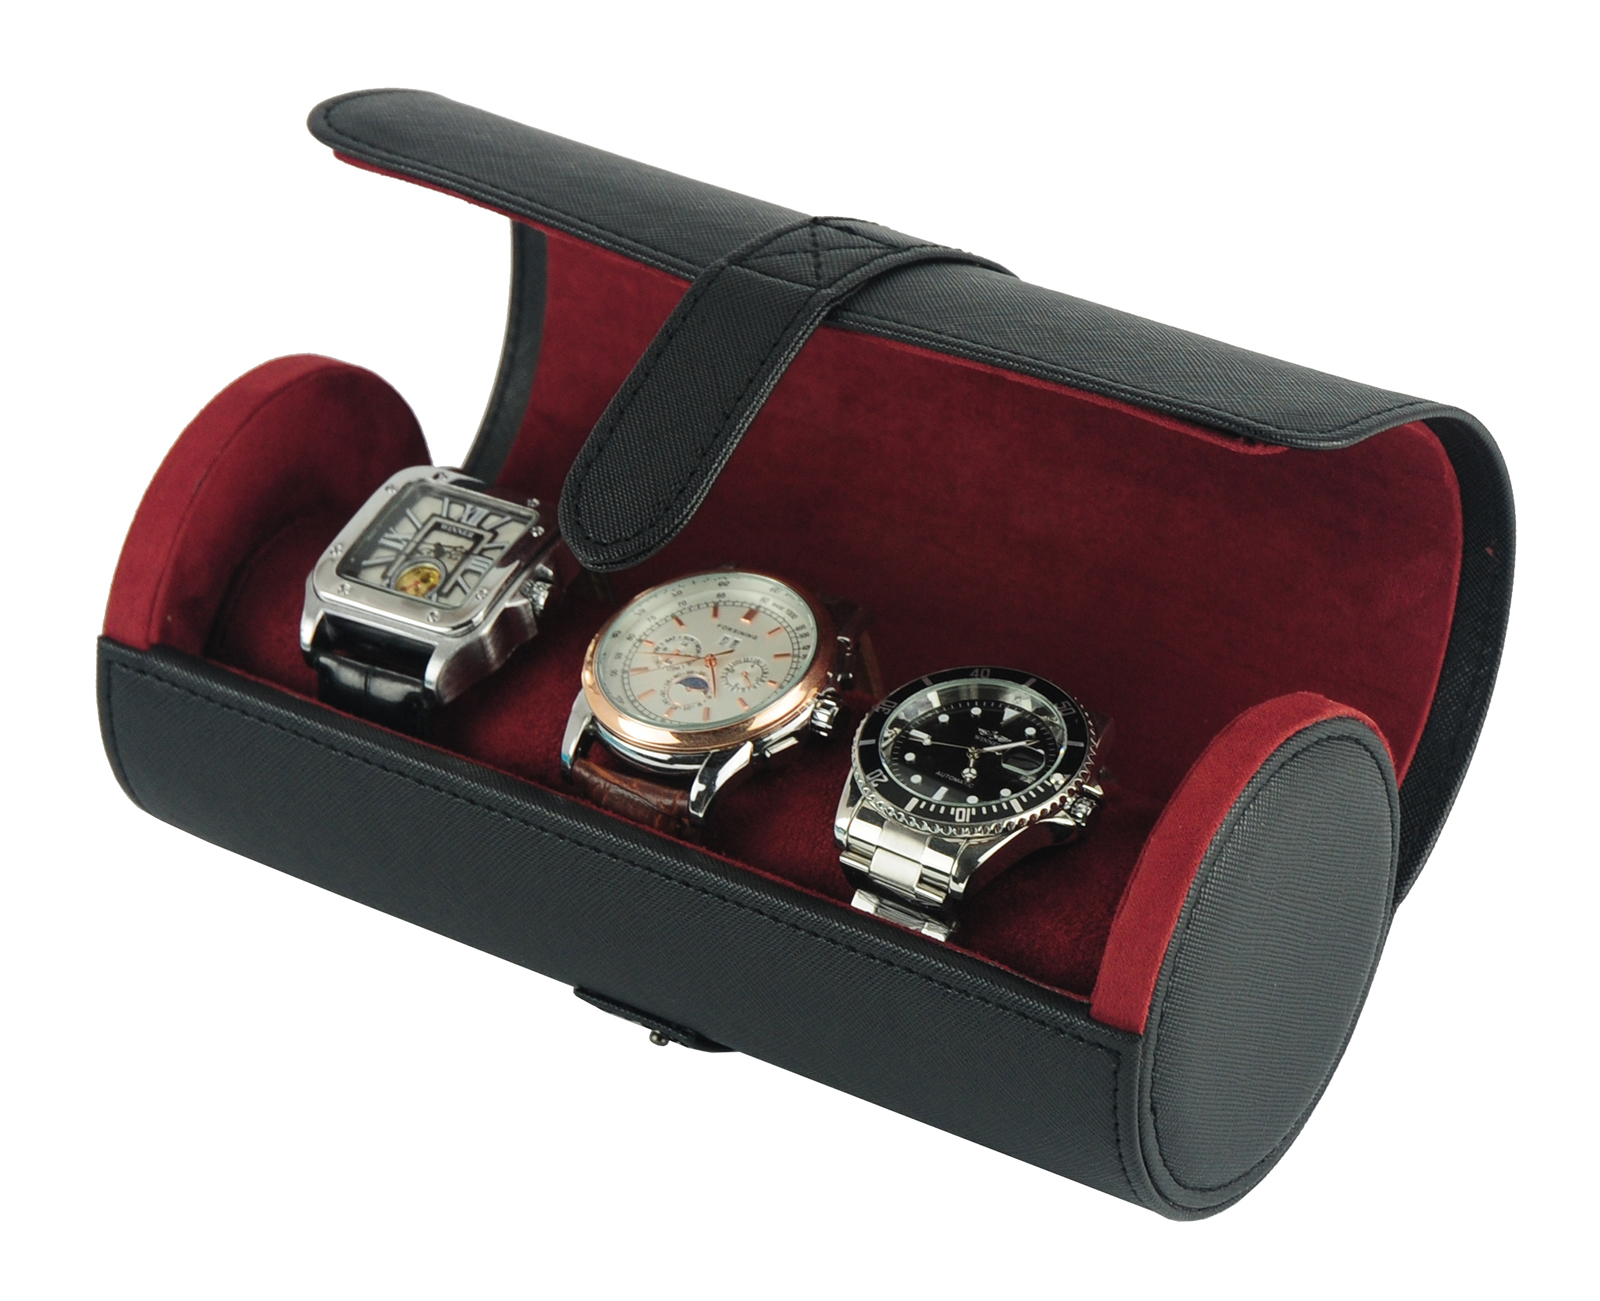 Deluxe Black Saffiano 3 Watch Bangle Bracelet Travel Watch Case and Jewelry Roll - image 1 of 6